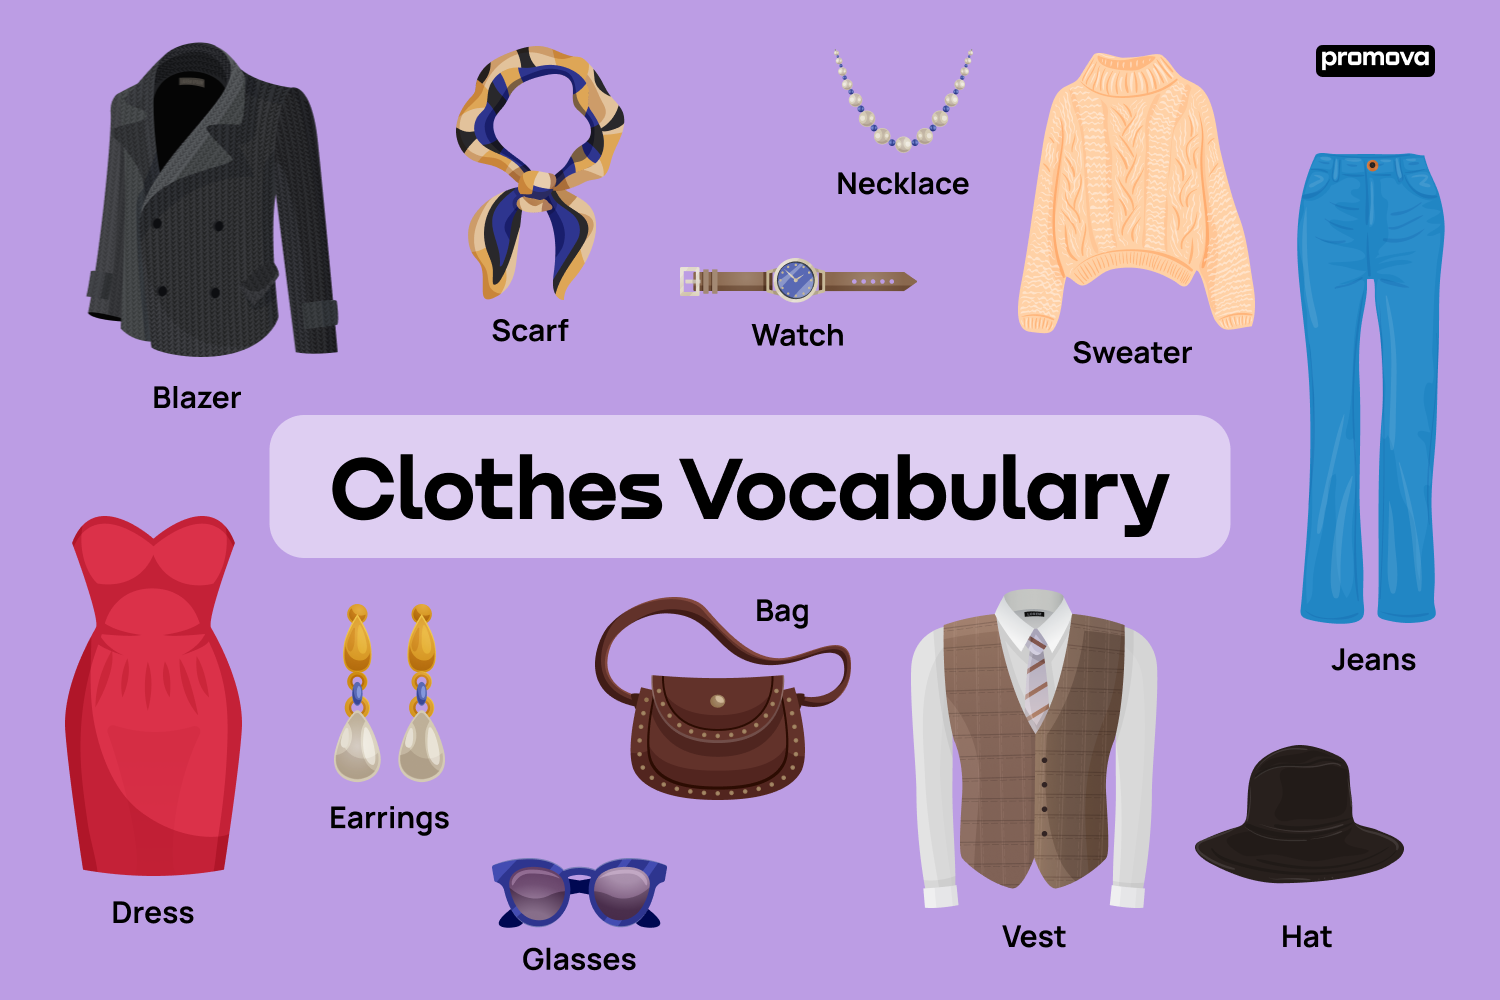 IELTS Speaking Part 1: Clothing - BLEARNING EDUCATION